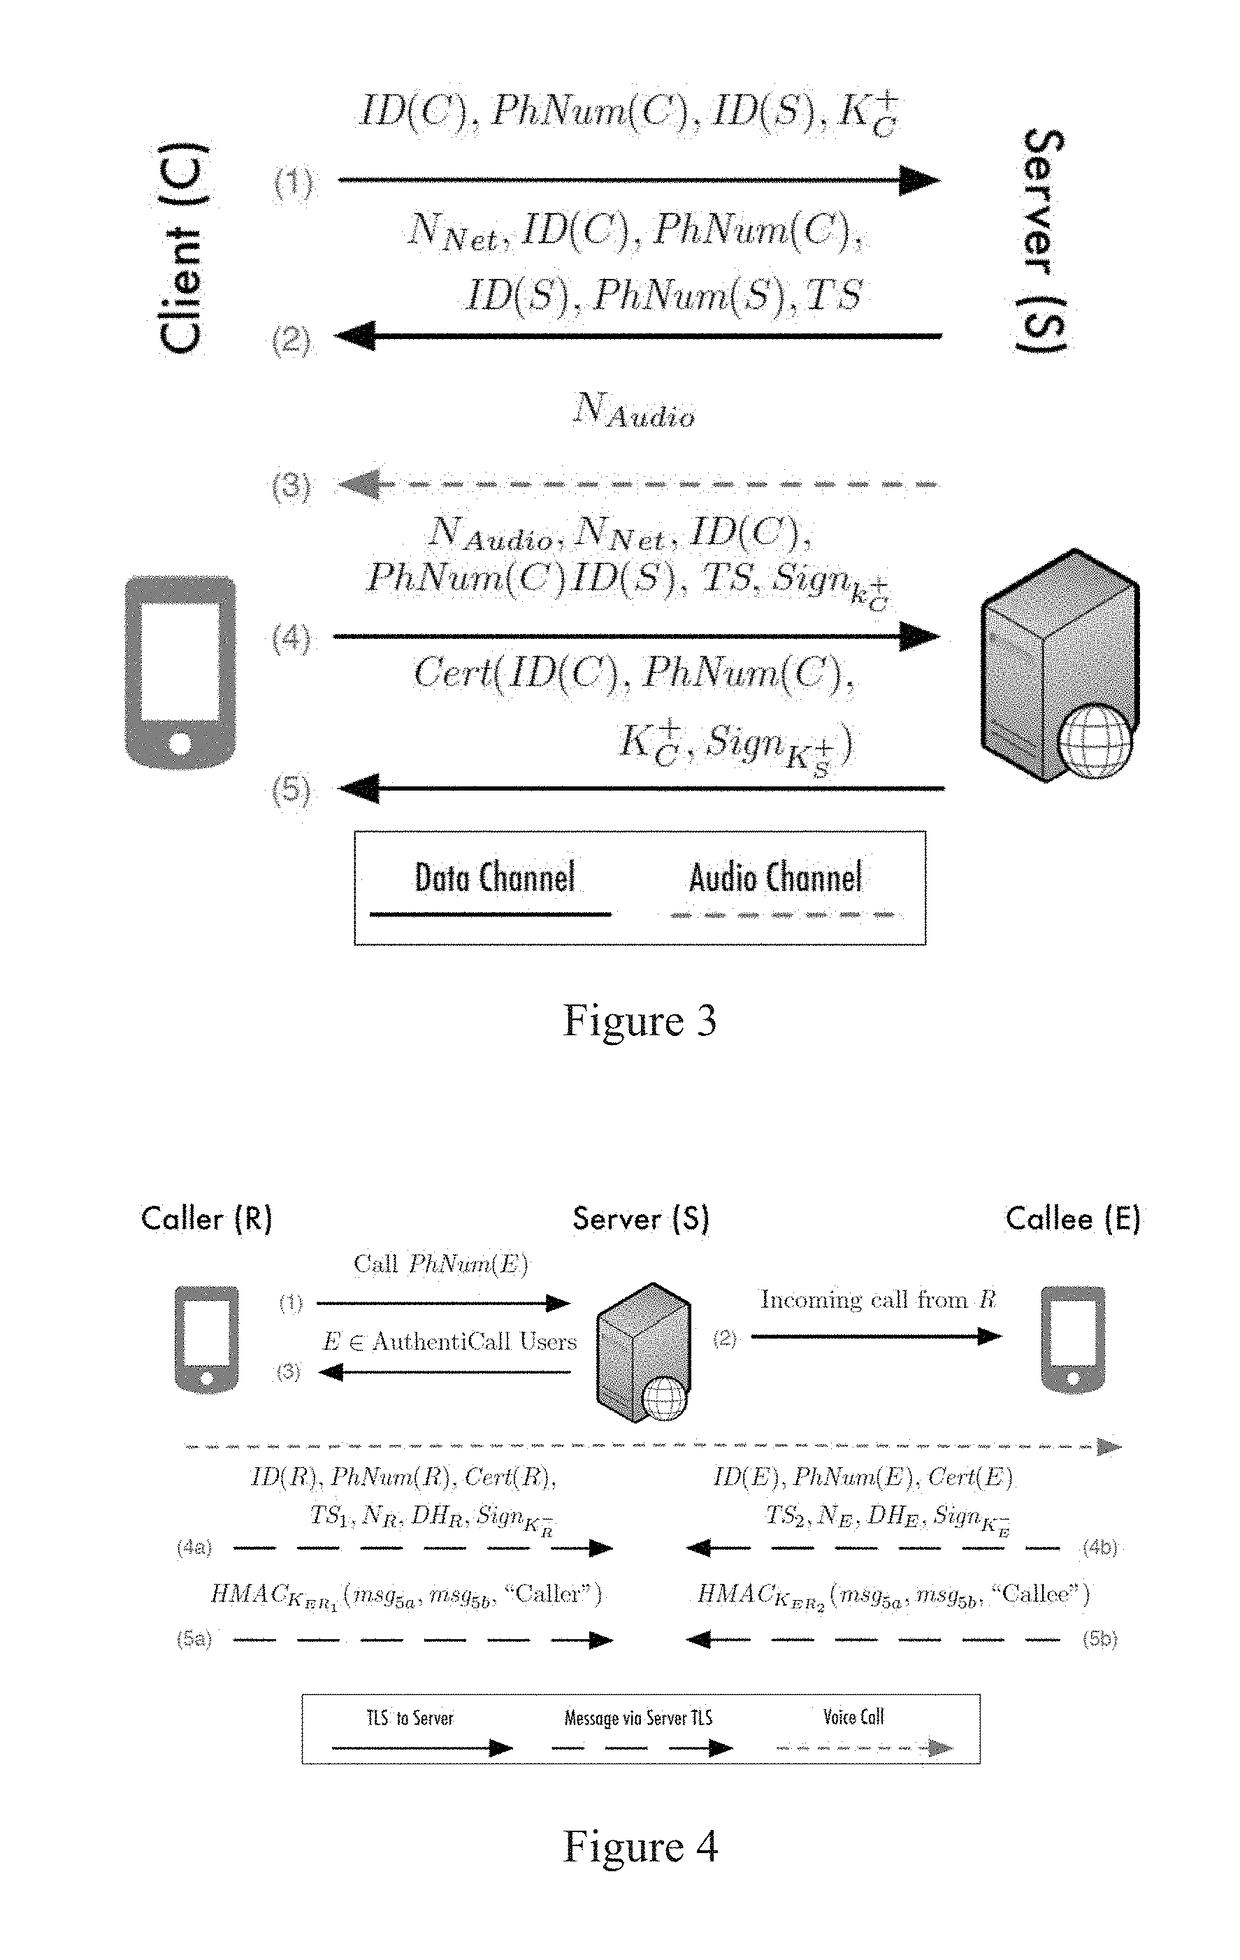 Identity and content authentication for phone calls